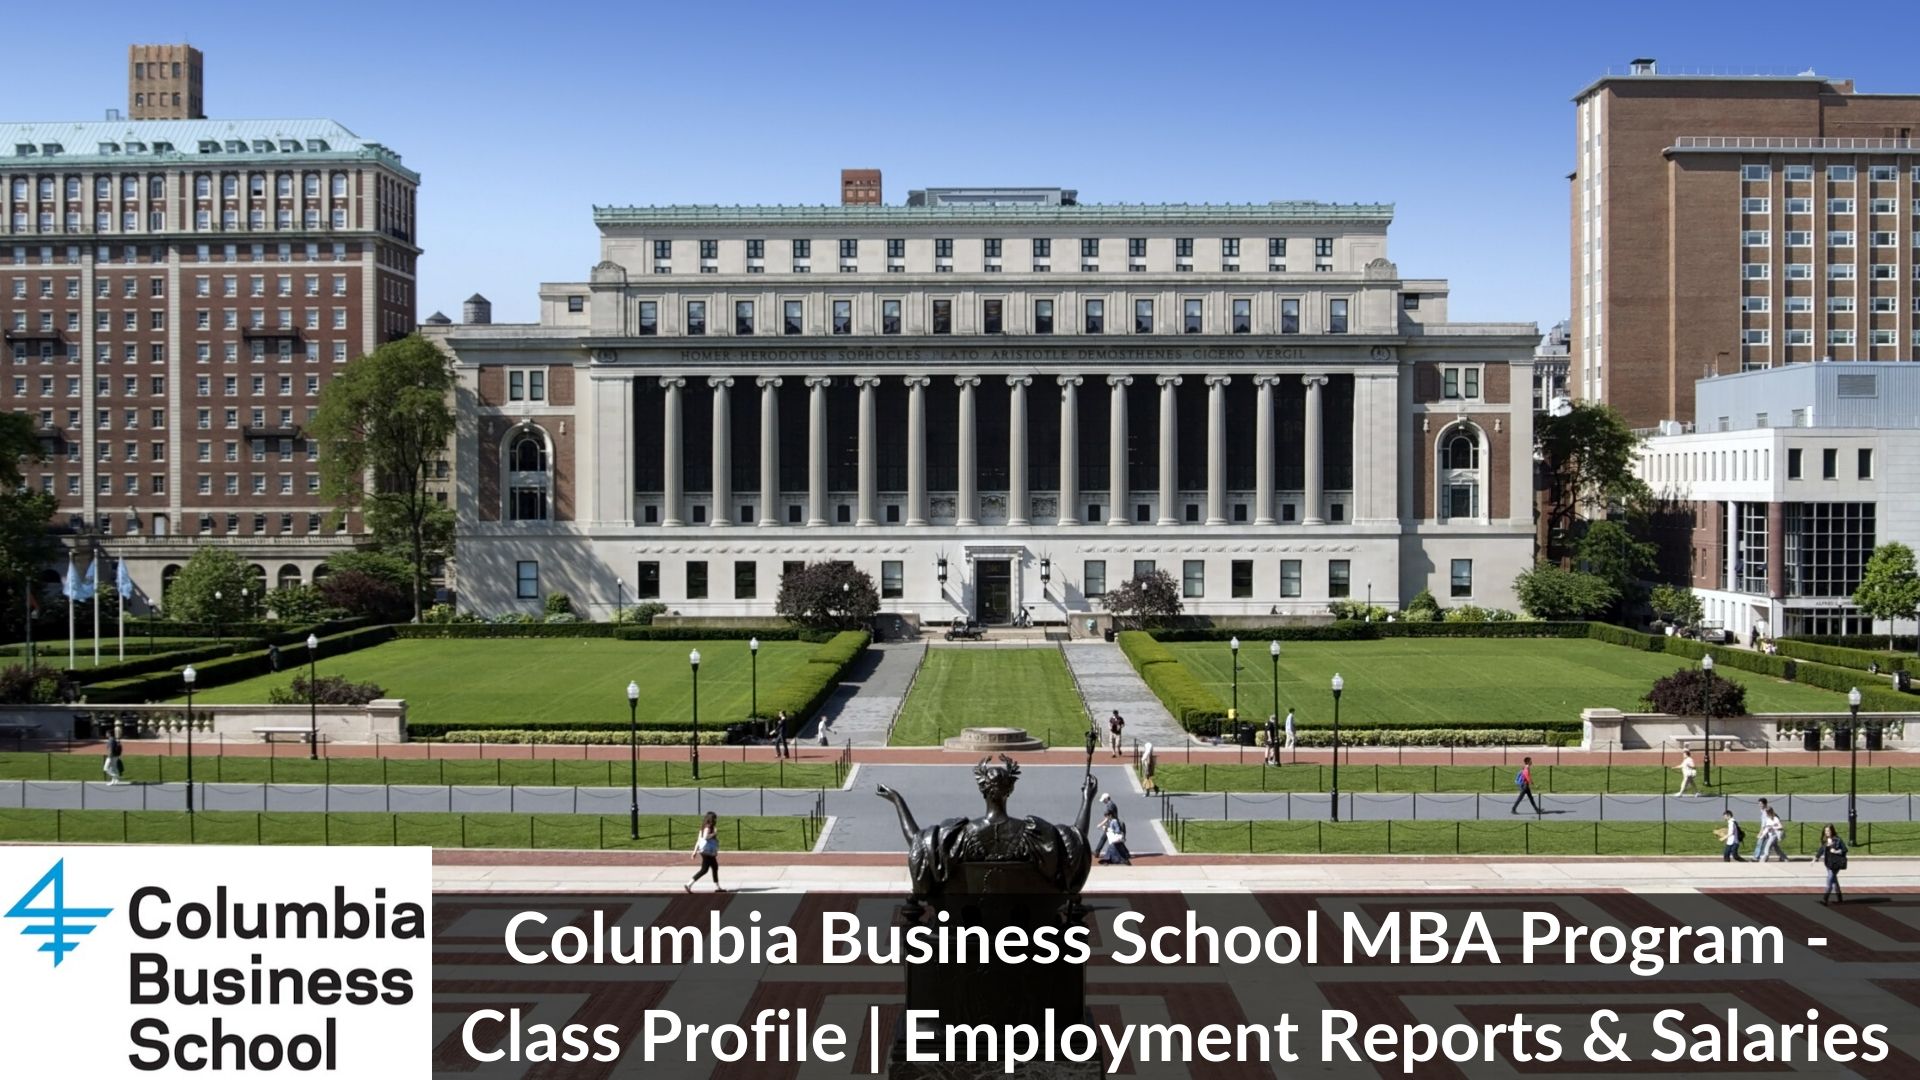 Columbia Business School MBA Program - All you need to know